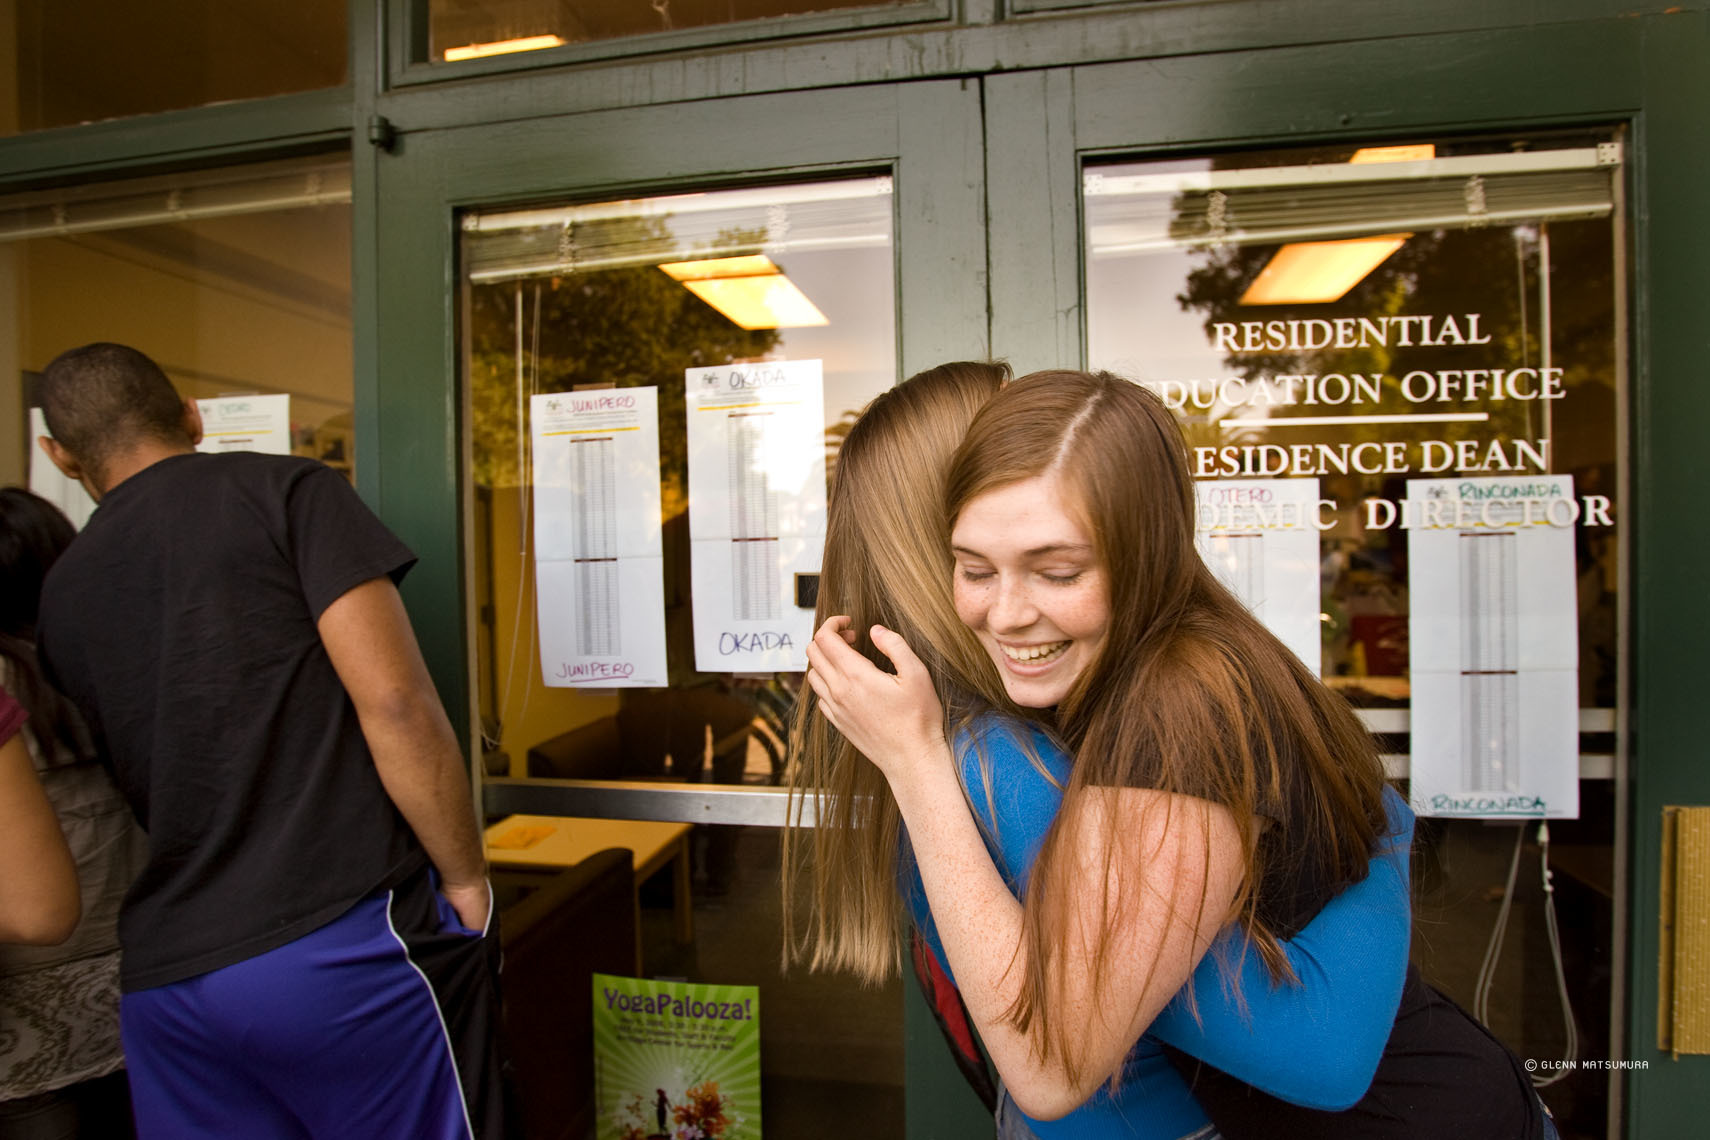 Students celebrating as the housing draw results are posted